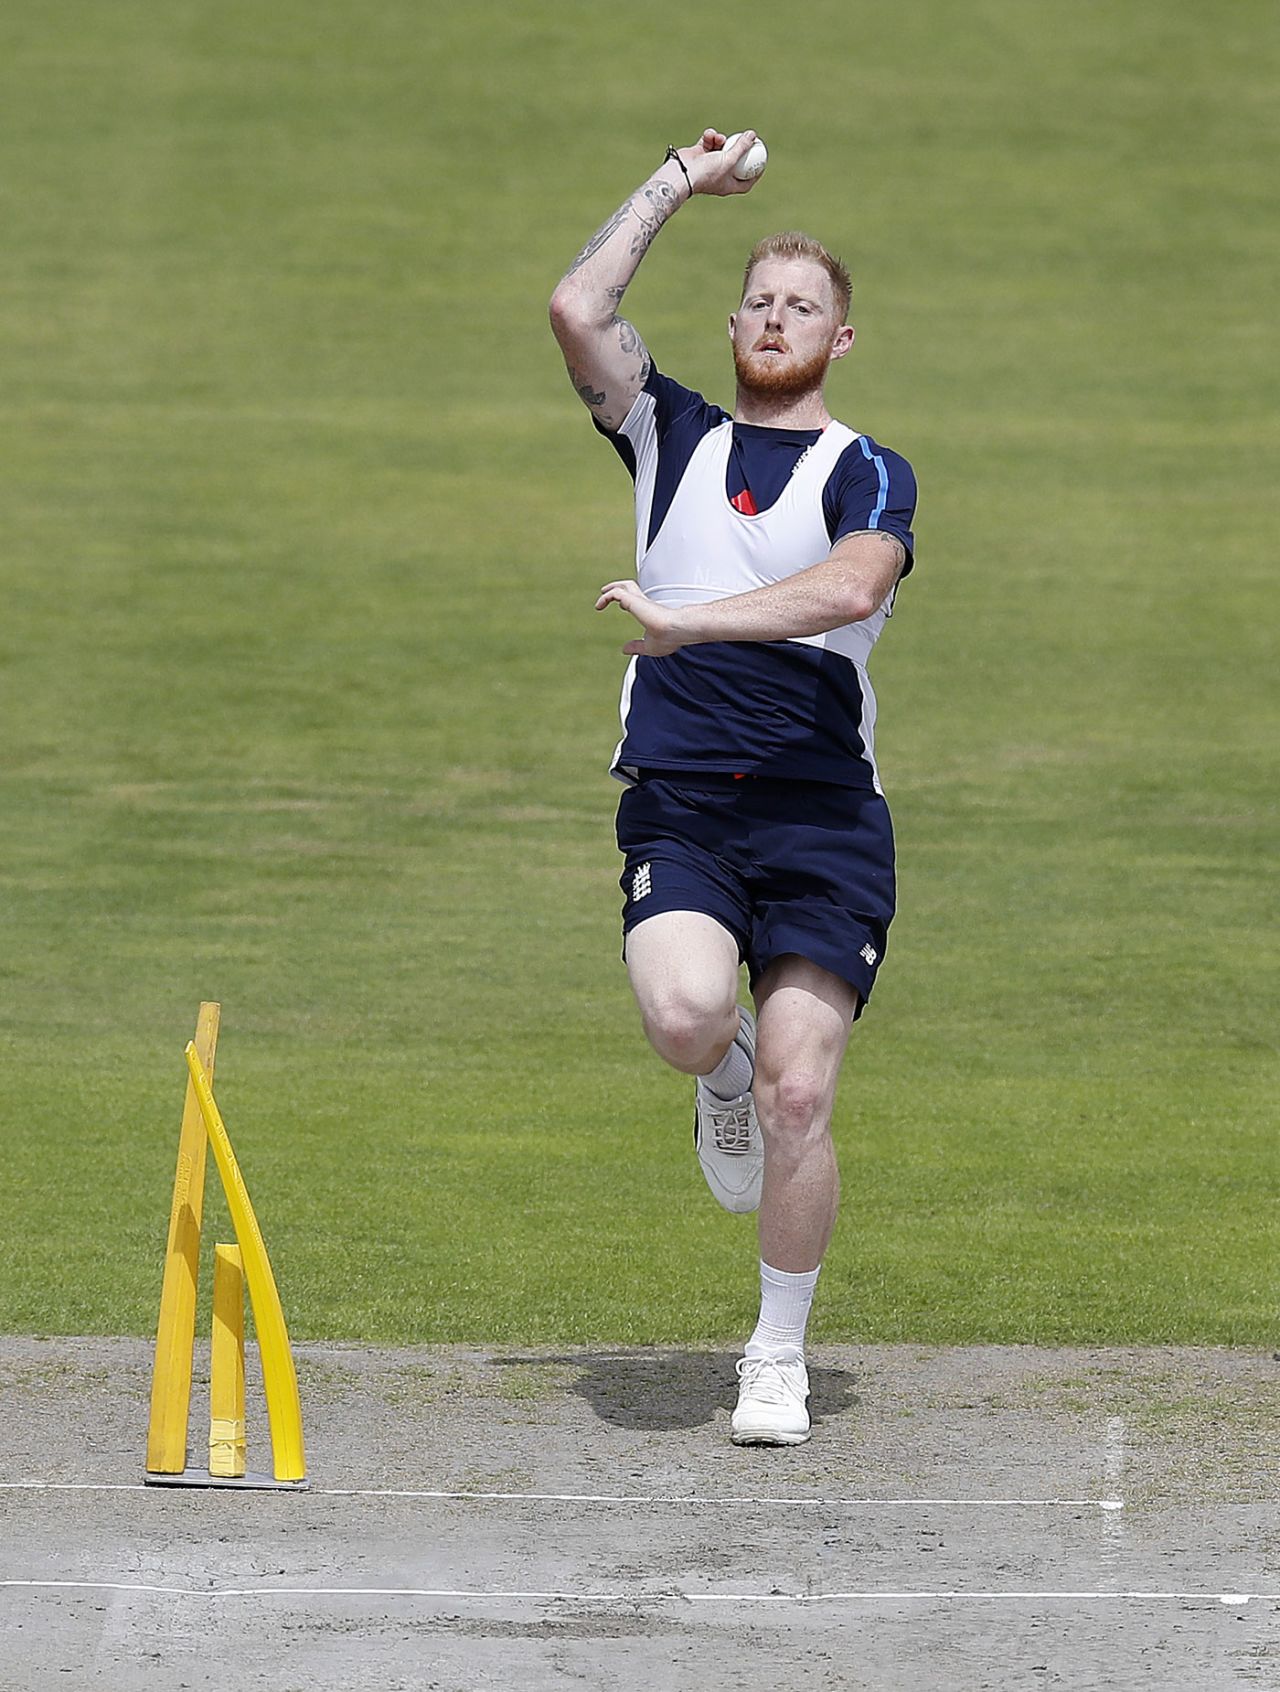 Ben Stokes continued to work his way back to fitness, Old Trafford, June 23, 2018